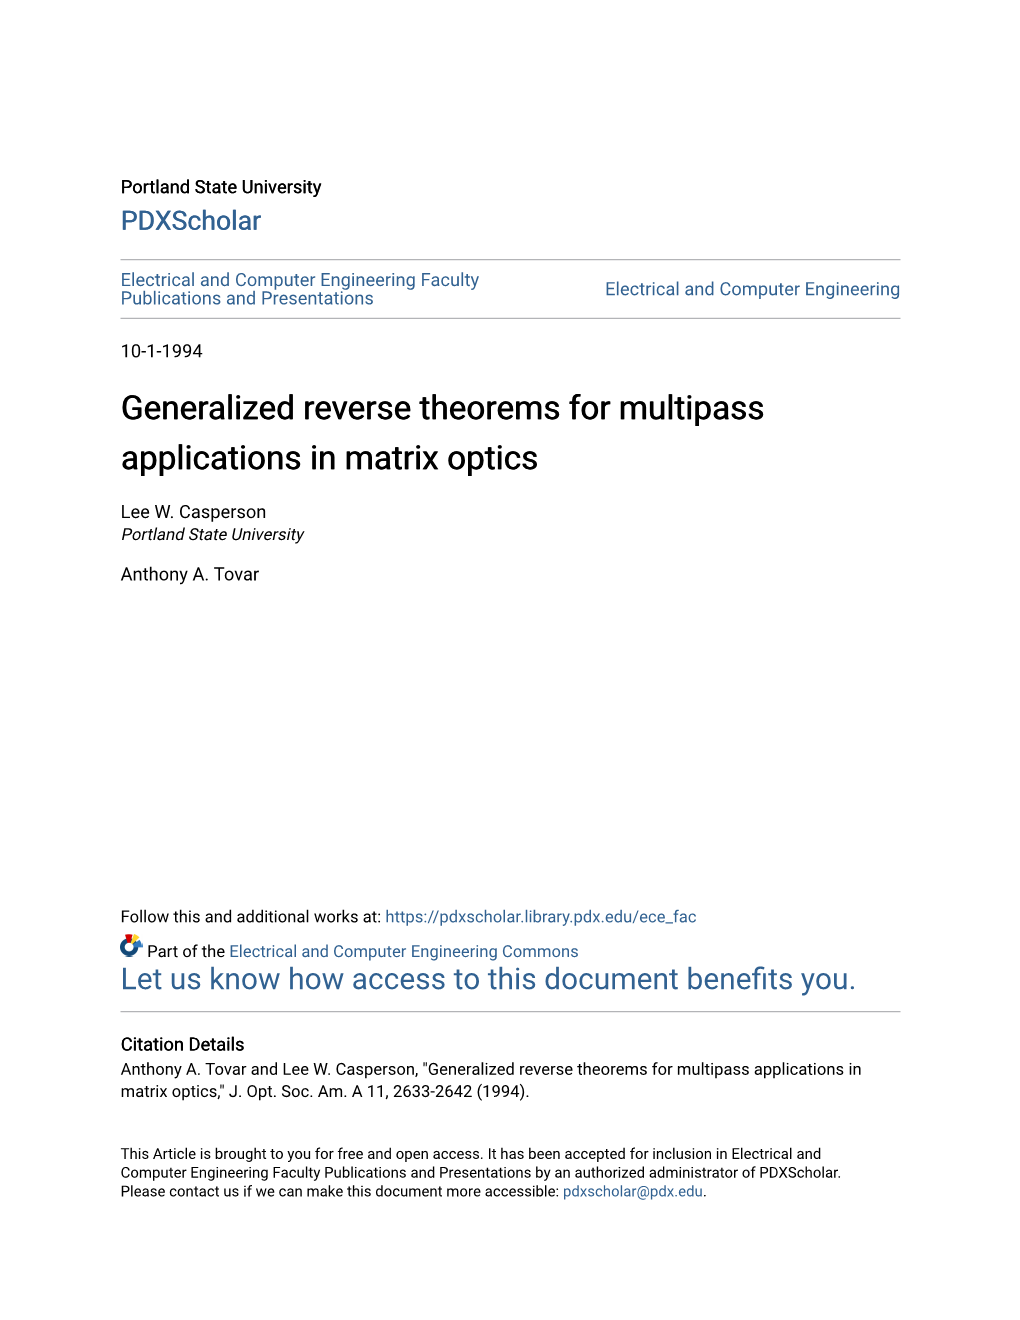 Generalized Reverse Theorems for Multipass Applications in Matrix Optics